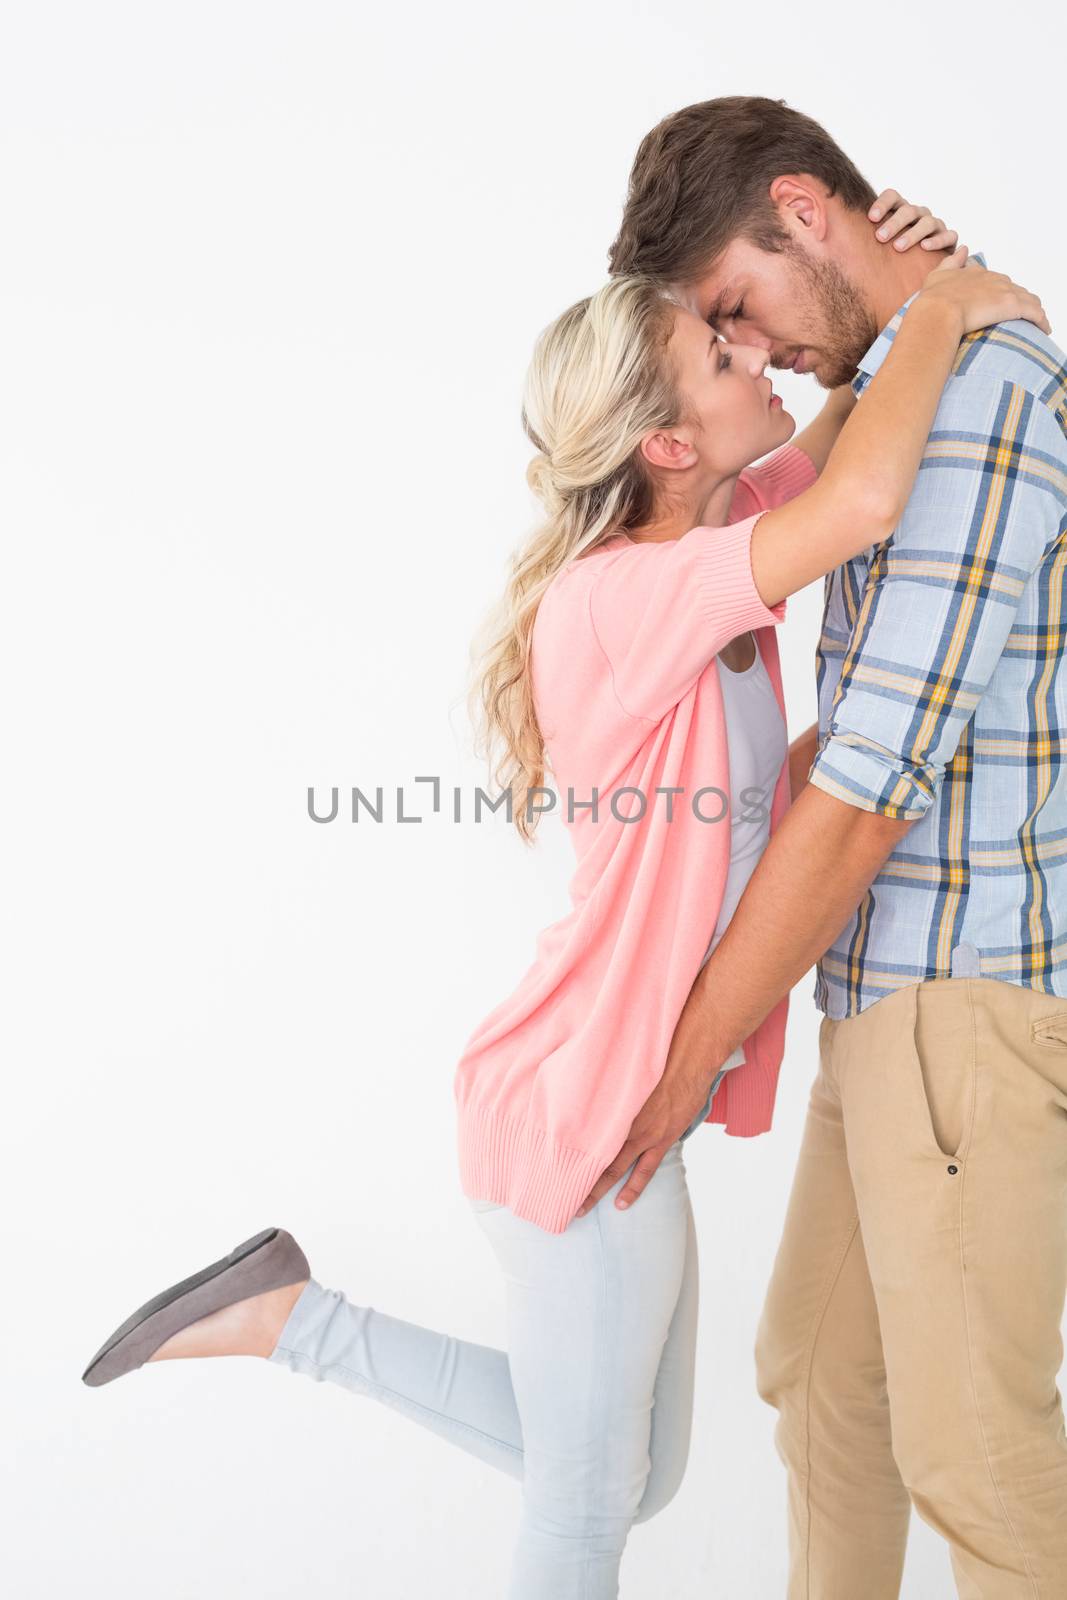 Side view of romantic young couple about to kiss over white background